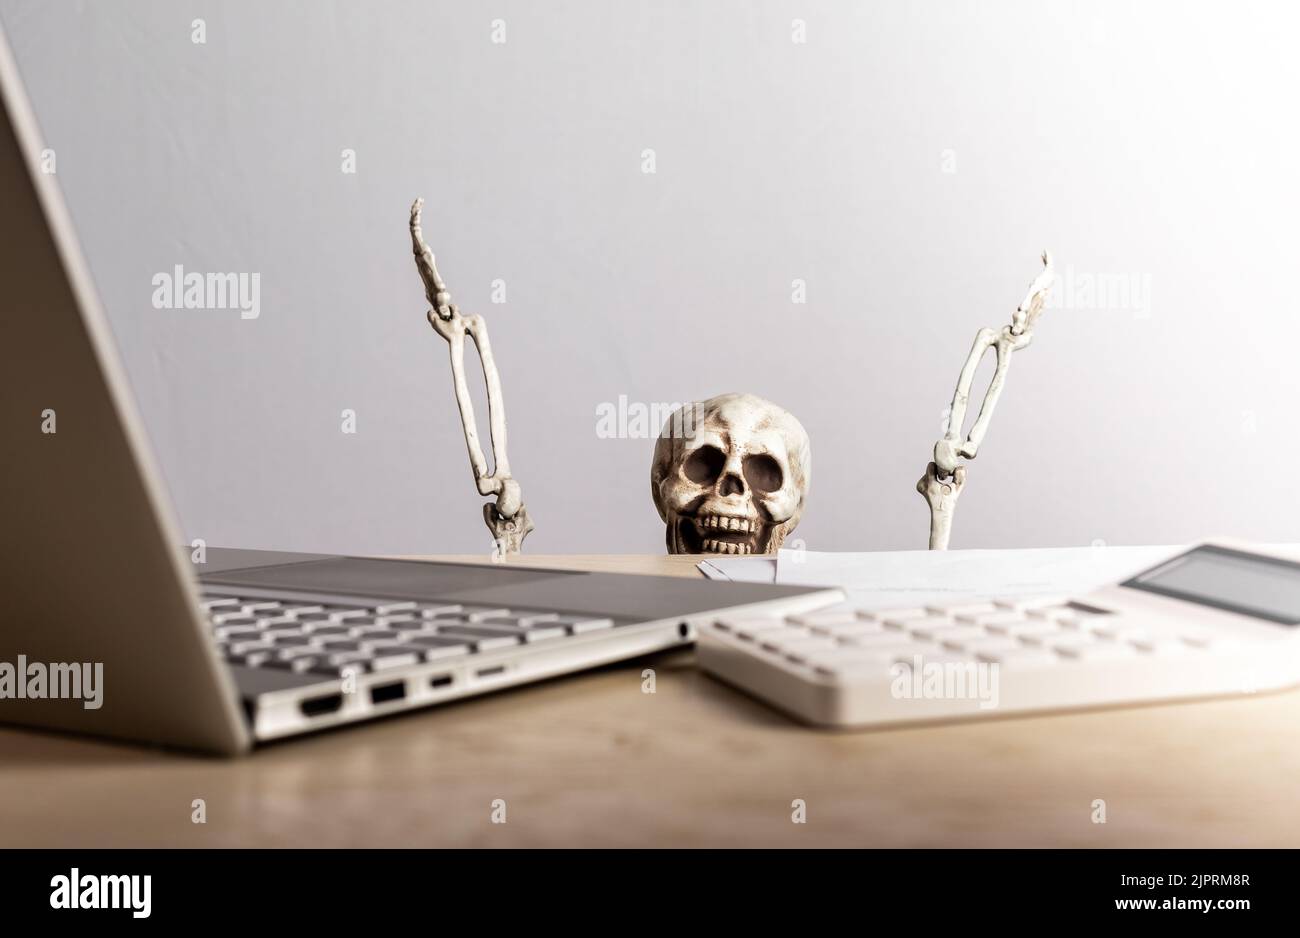 Job burnout. Skeleton peeking out from desk with laptop and calculator. Computer geek. Emotional and physical exhaustion, frustration, stress from wor Stock Photo